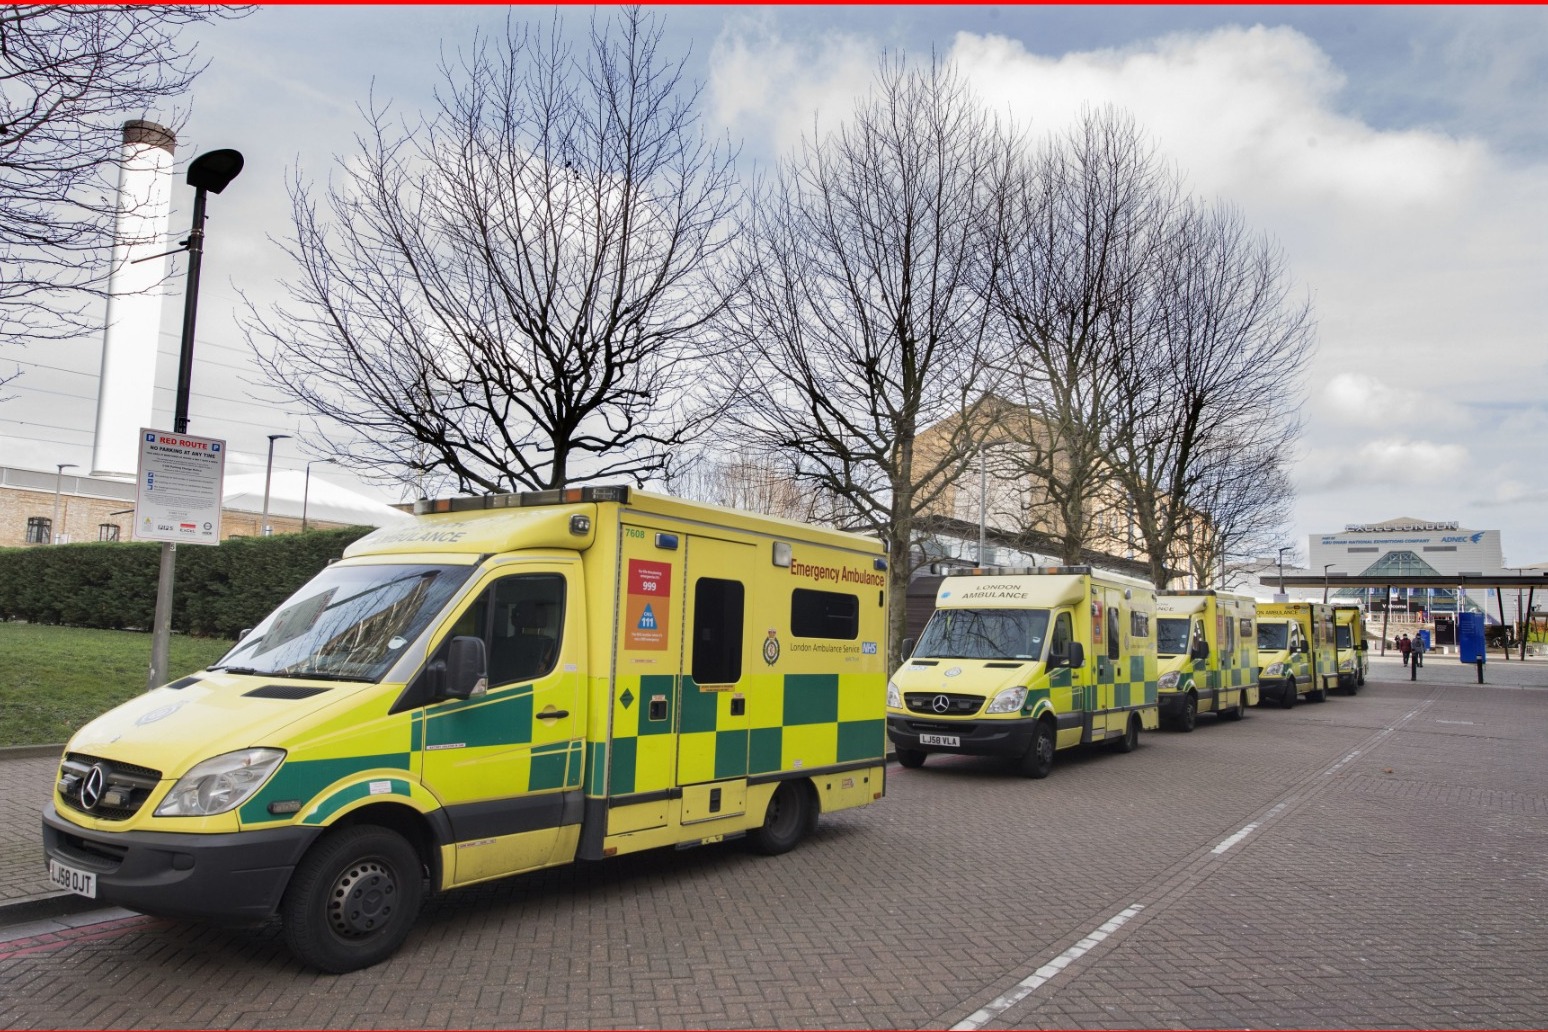 Ambulance workers ‘at breaking point’, union survey suggests 